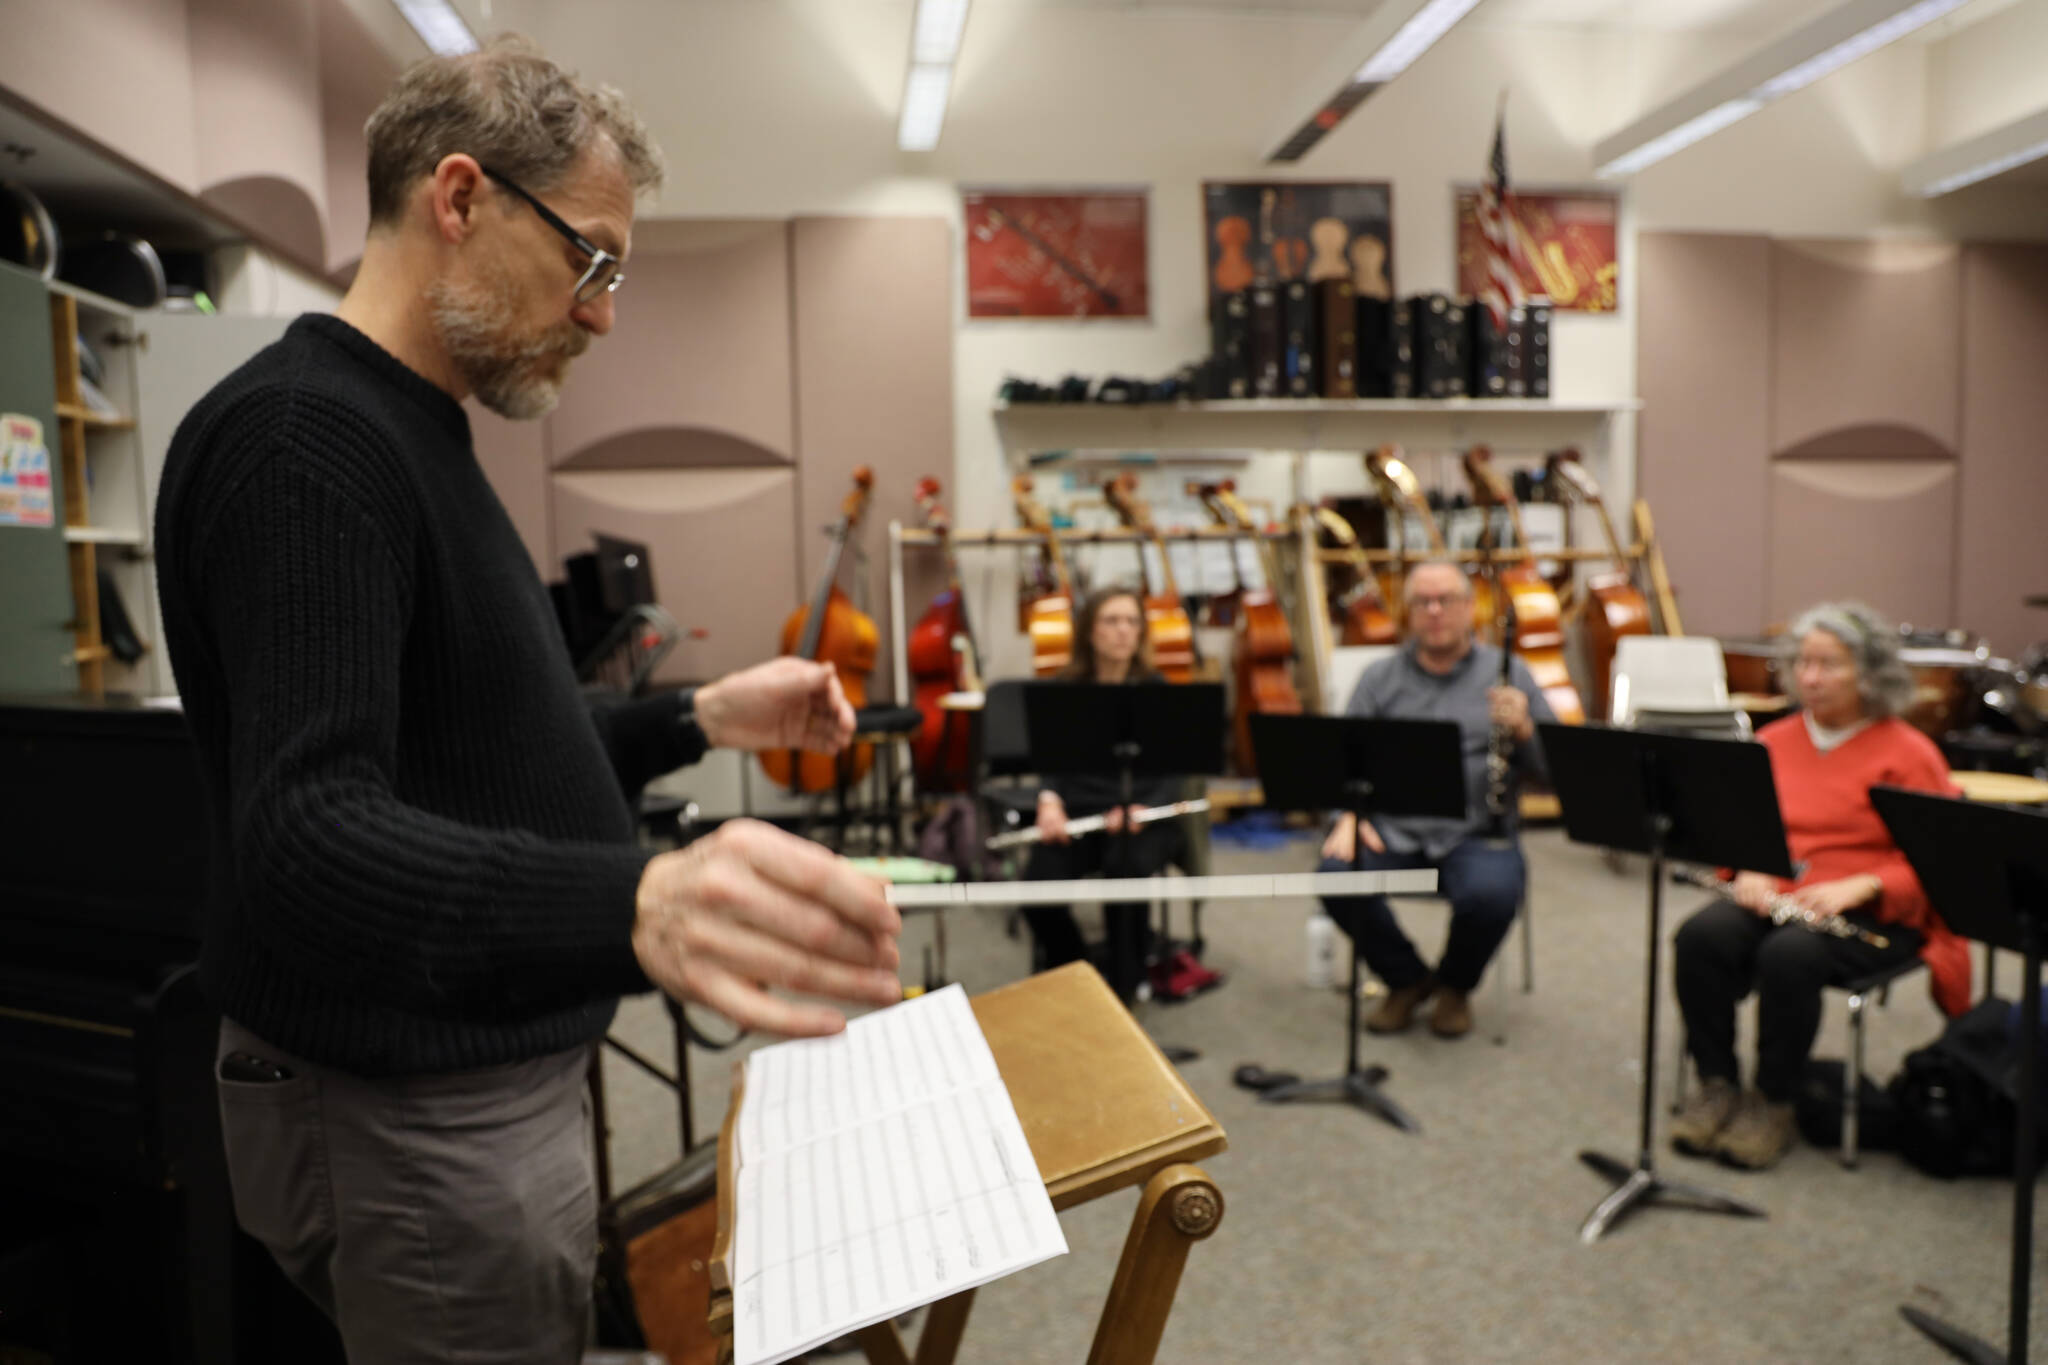 Clarise Larson / Juneau Empire 
Mike Bucy keeps the temp while he conducts local composer and musician Ben Holtz’s piece, Atmosphere with Radio Occultation, during Con Brio Chamber Series’ Tuesday evening rehearsal.